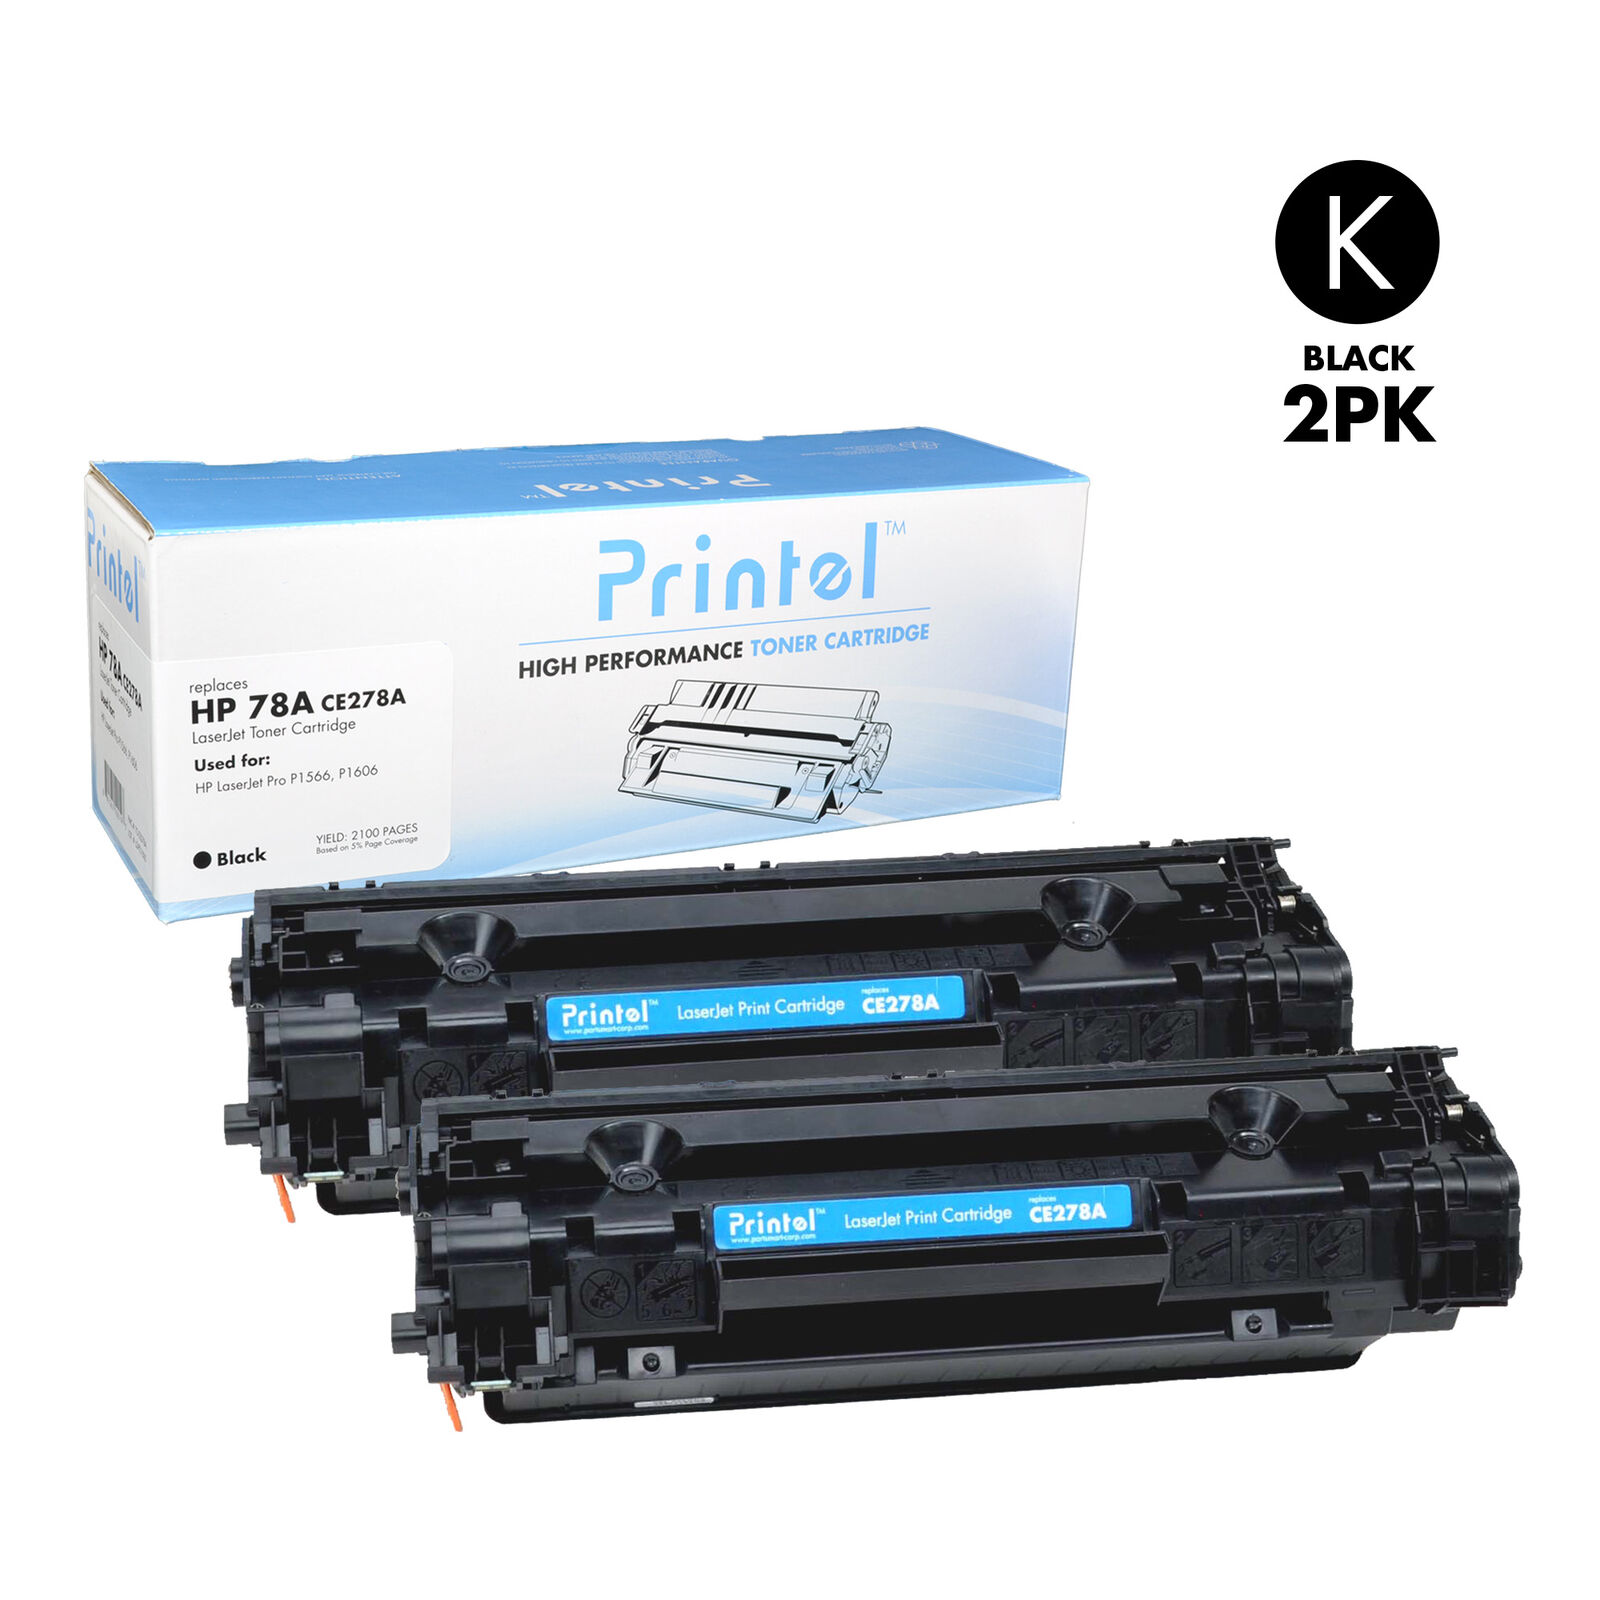 Printel Compatible Toner Cartridge Replacement for HP 78A (CE278A) Black 2 Pack